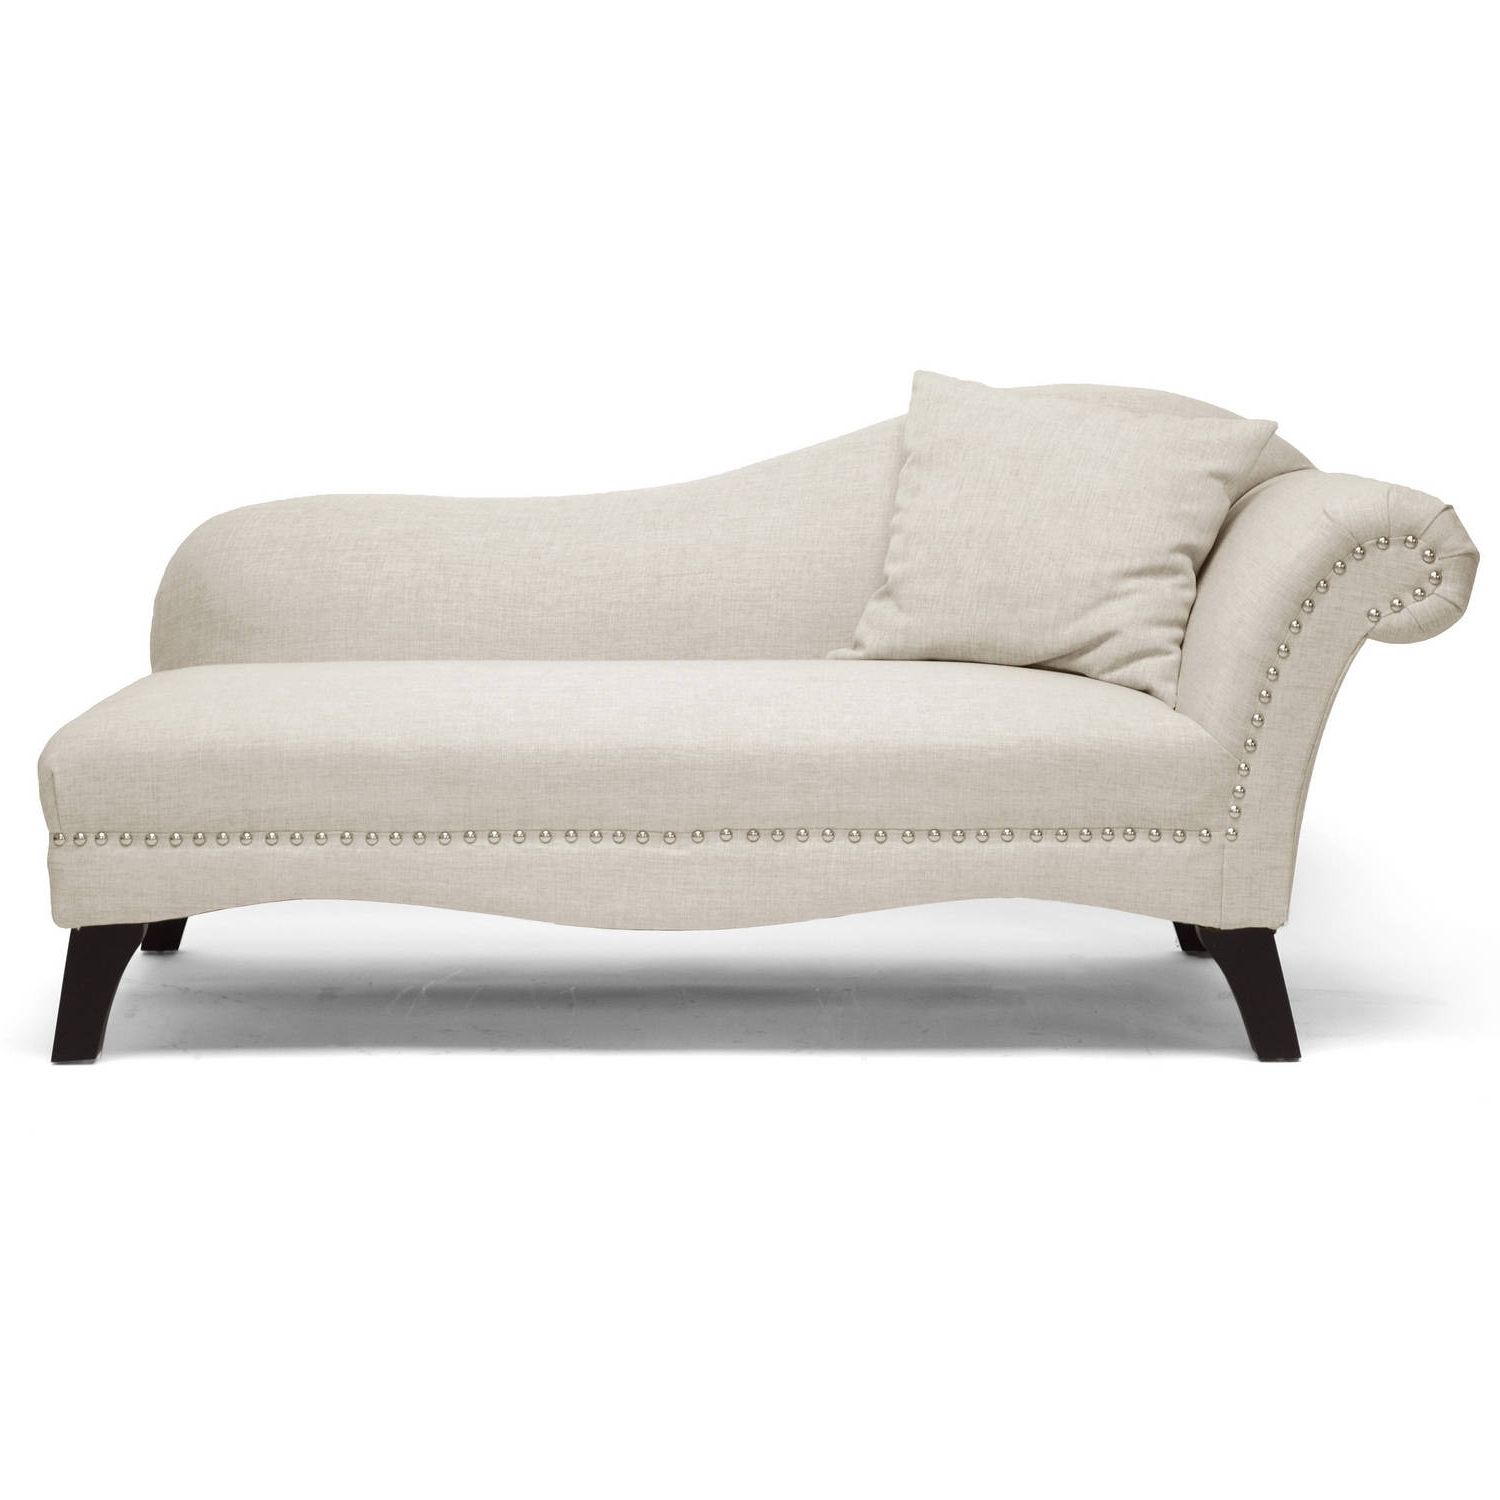 White Leather Chaise Lounges Pertaining To 2018 Chaise Lounges – Walmart (Photo 11 of 15)